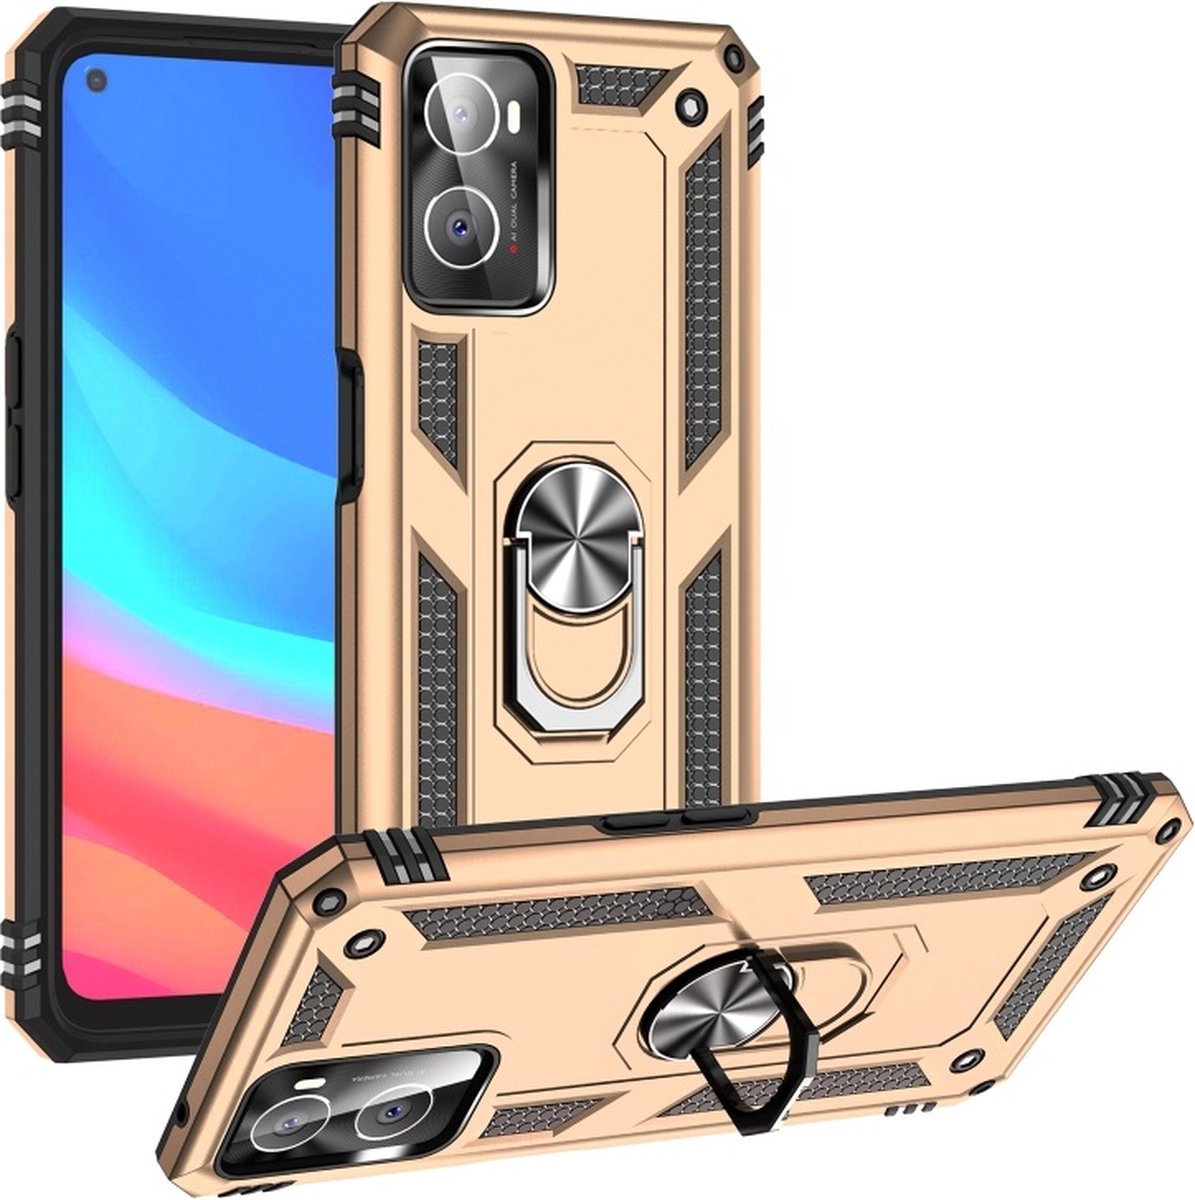 Geschikt voor Oppo A76 Hoesje Armor Anti-shock Backcover Goud - Geschikt voor Oppo A76 - Geschikt voor Oppo A76 Backcover kickstand Ring houder cover TPU backcover oTronica